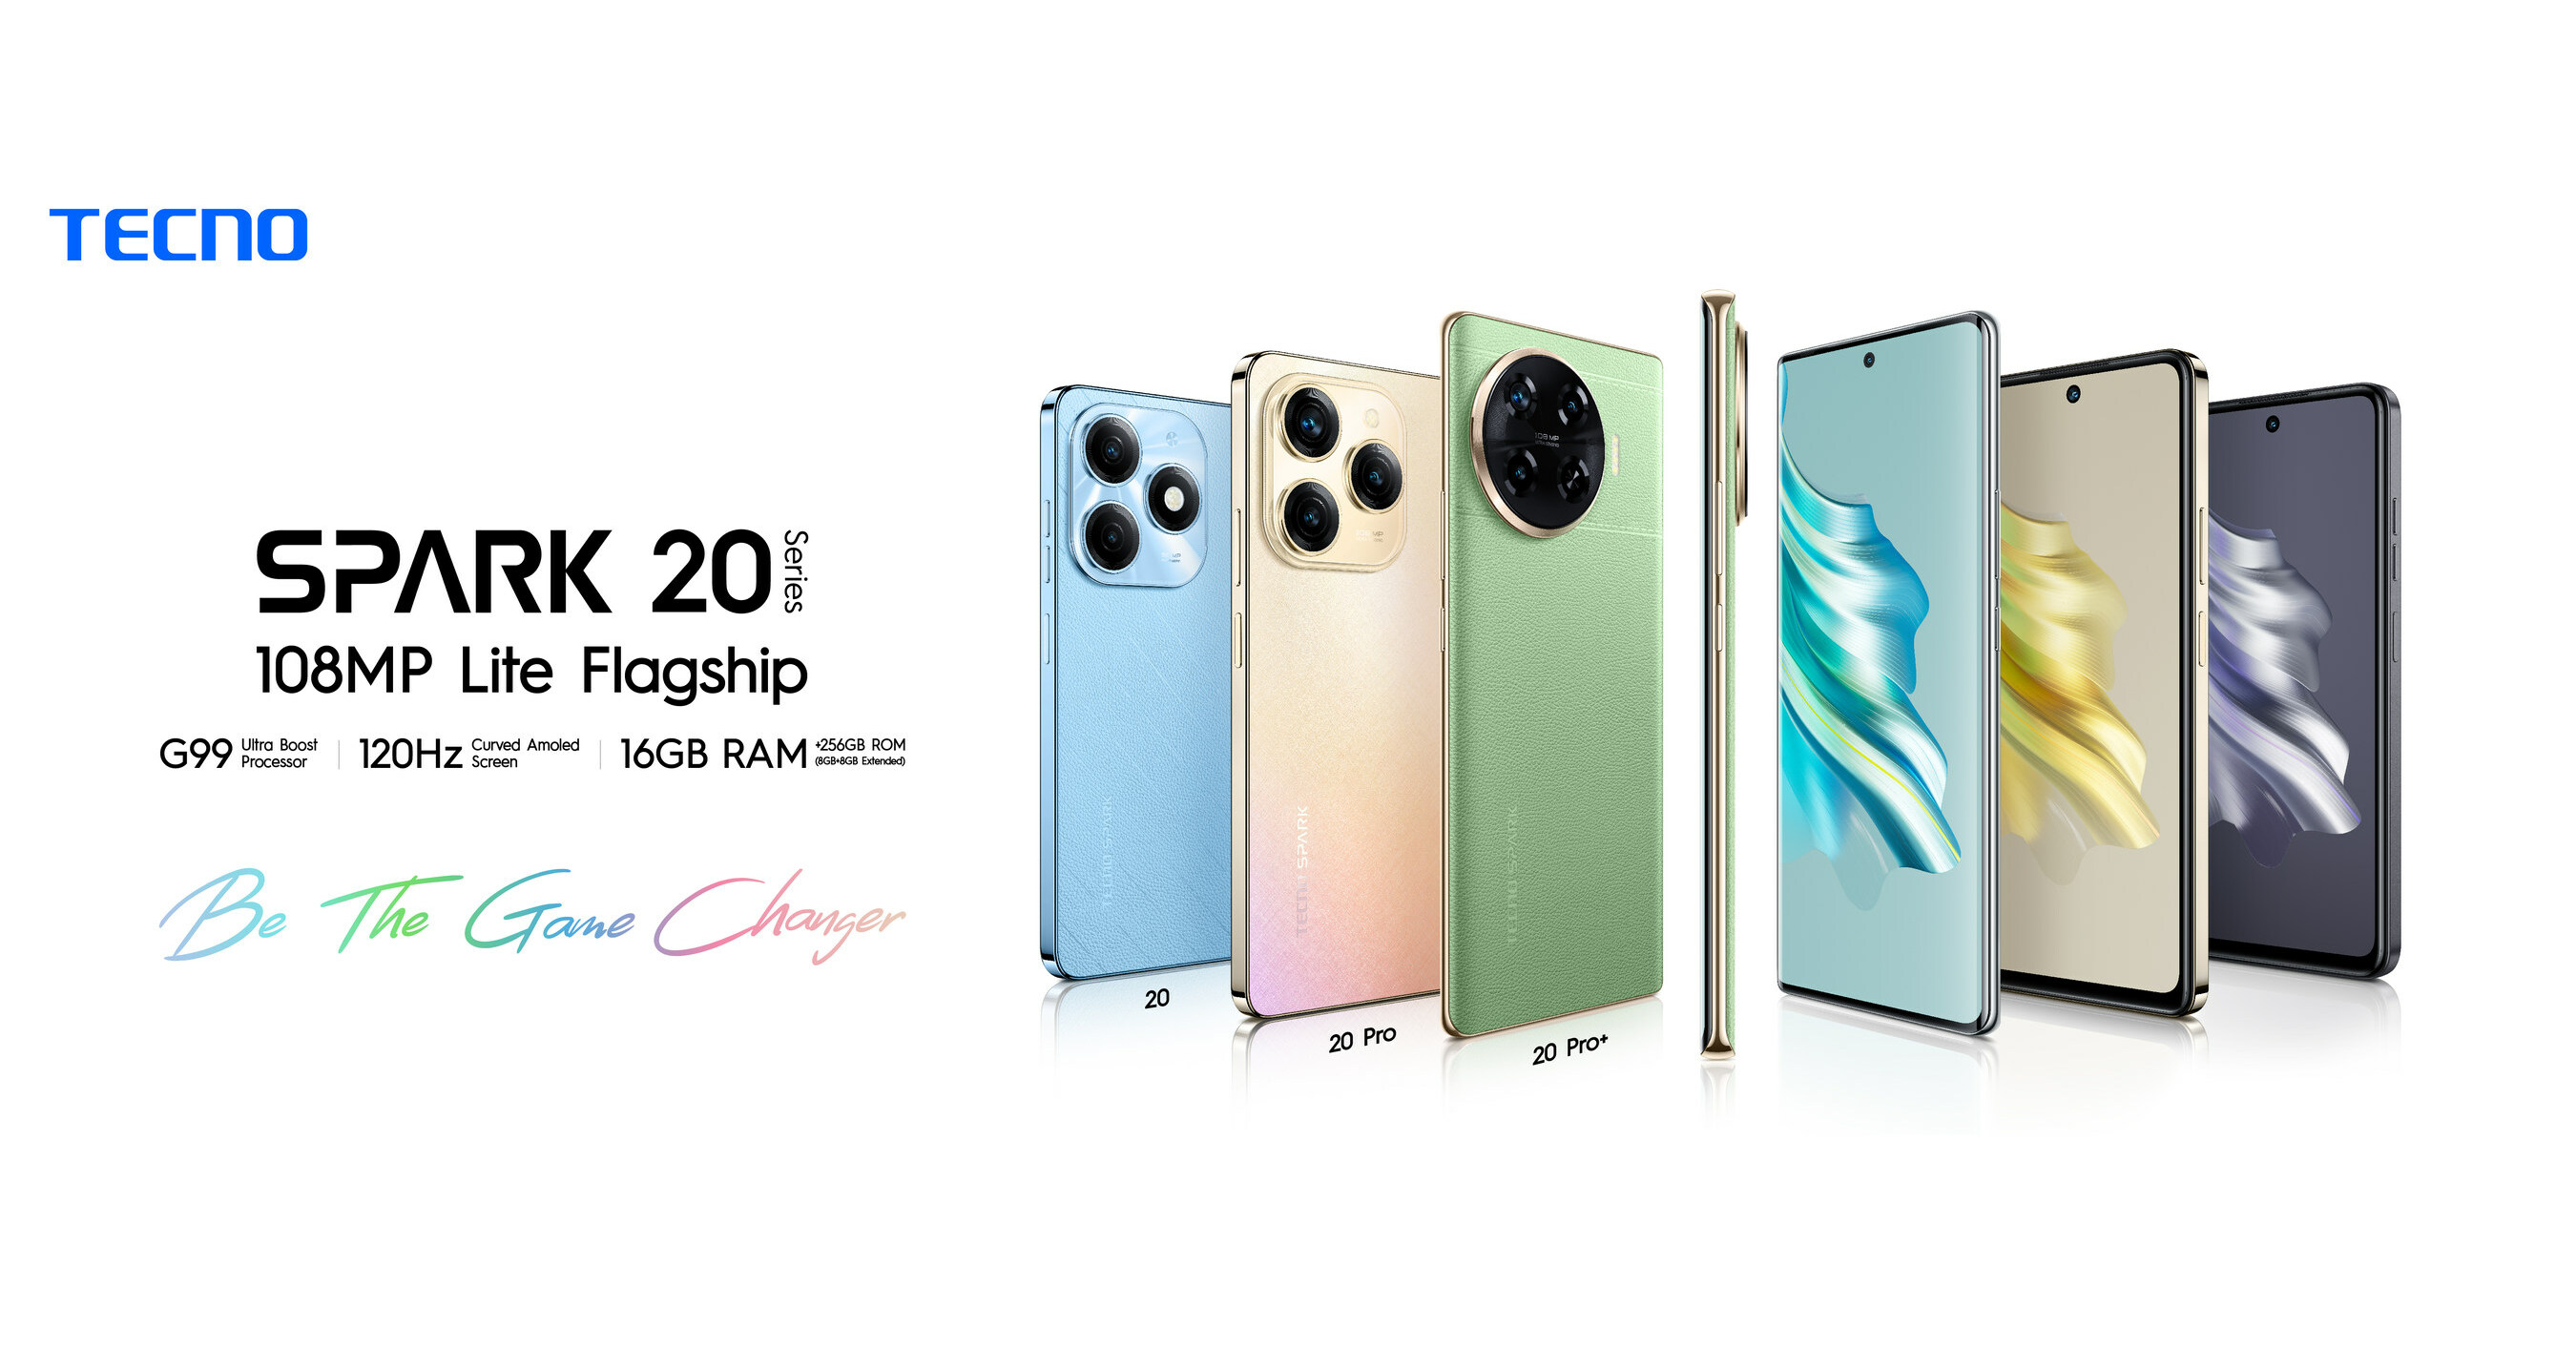 TECNO's Upcoming SPARK 20 Pro+ to Feature Sleek Double Curve Design and  108MP Camera for Gen Z Consumers